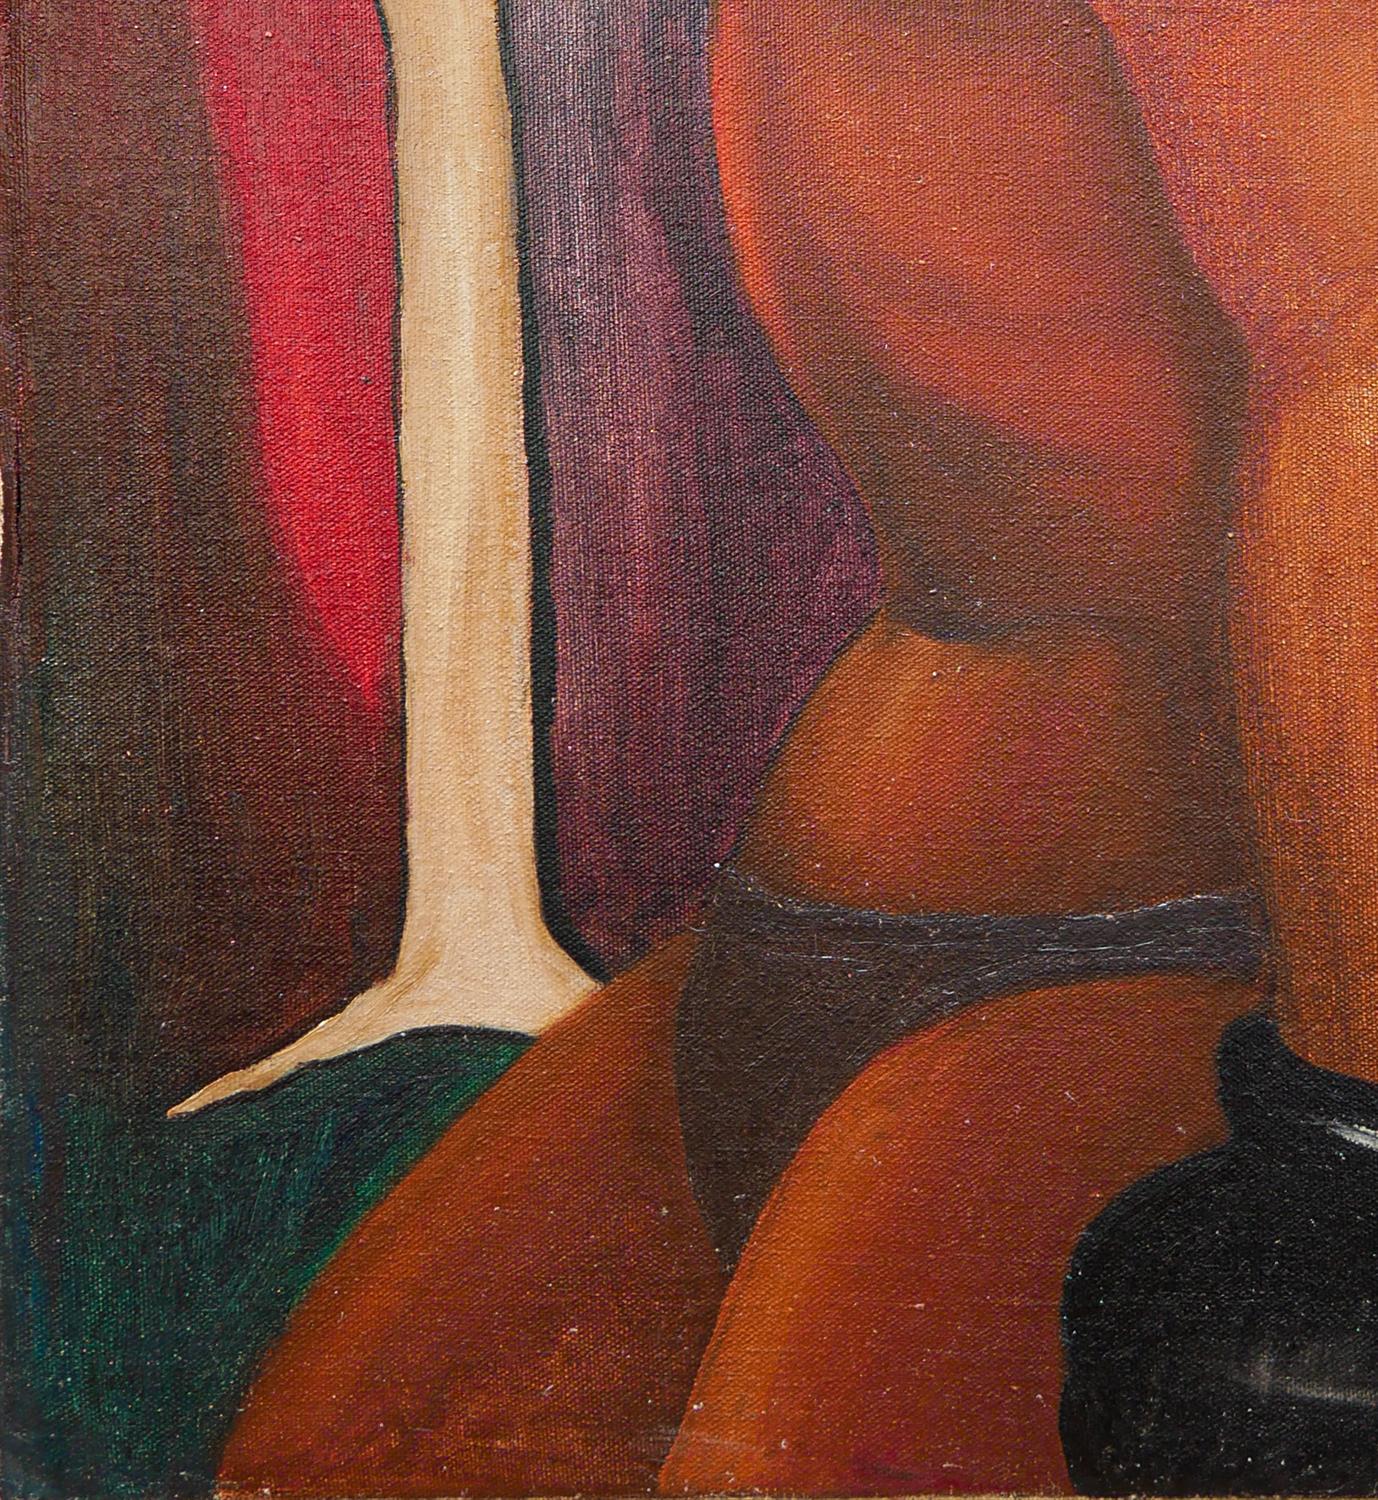 Warm-toned abstract figurative painting by an unknown artist. The painting depicts Galveston, TX boxer John Arthur Johnson in profile view. Unsigned. Unframed but framing options are available.